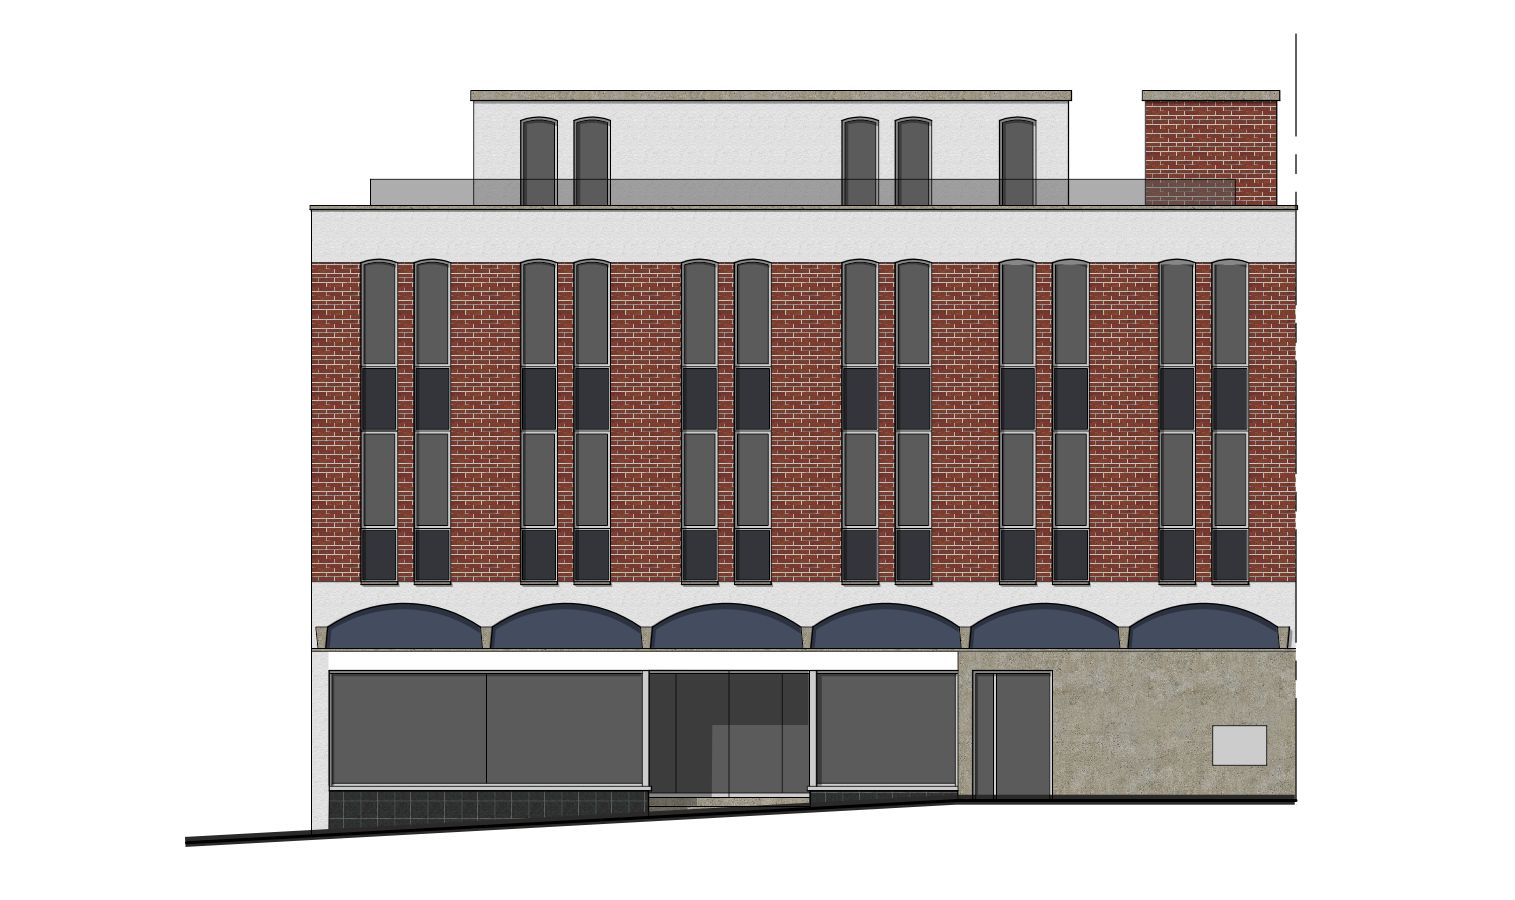 offices converted to flats prior notification proposed front drawings swindon planning application